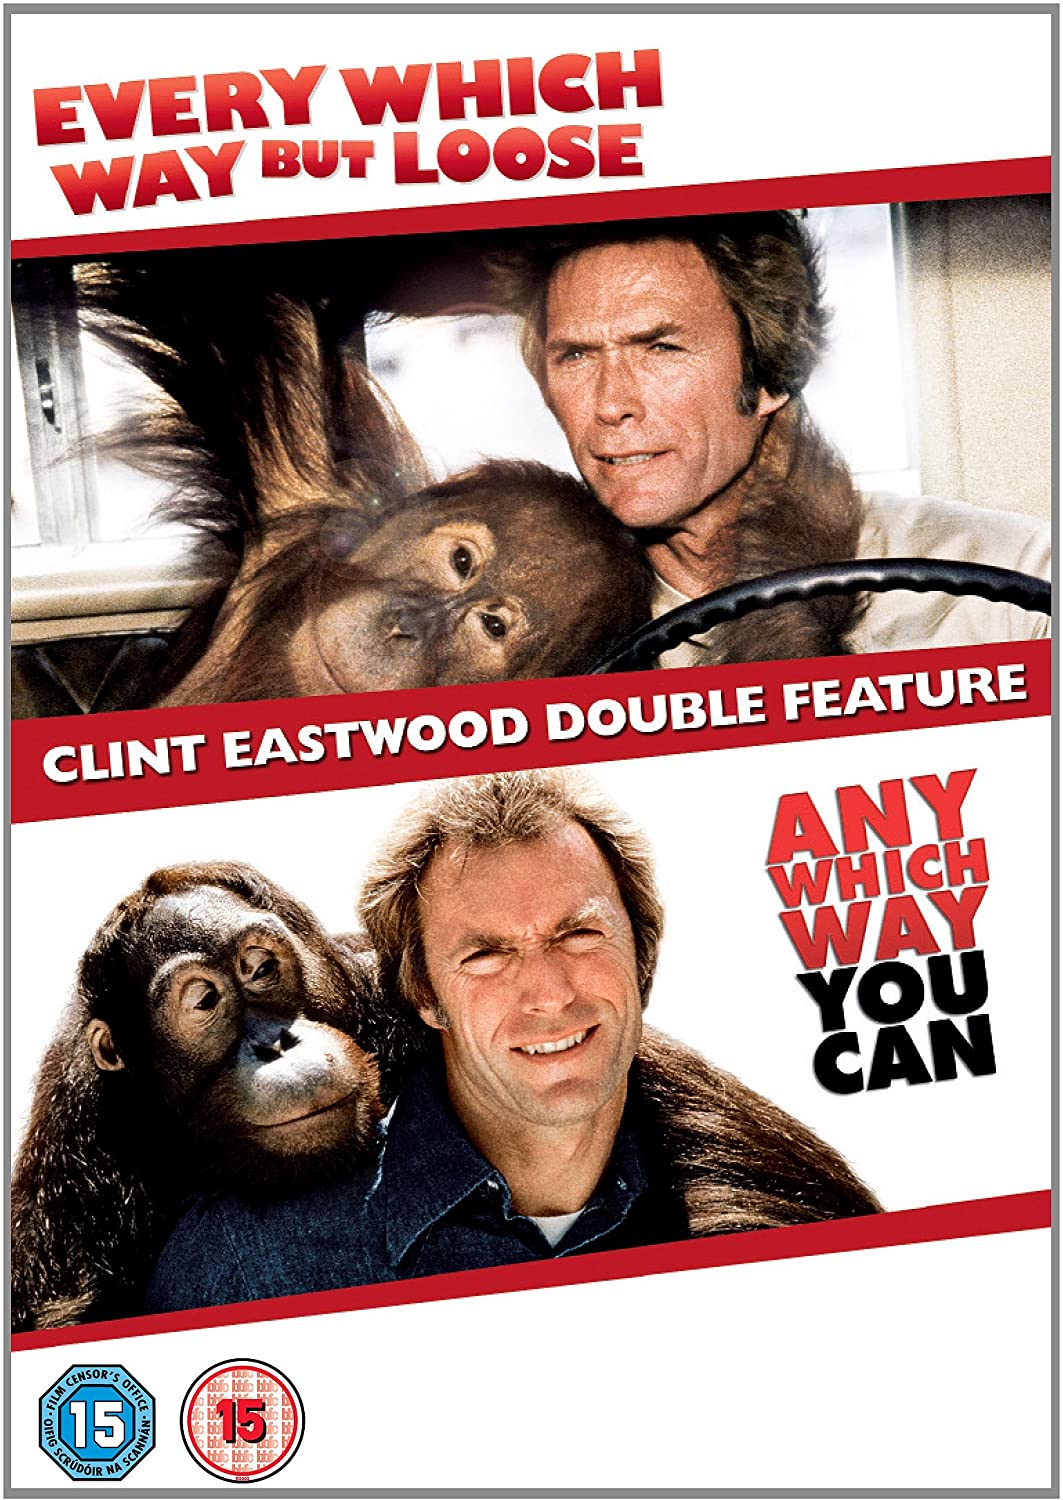 Every Which Way But Loose/Any Which Way You Can [2 Film Collection] [2005] - Comedy/Action [DVD]